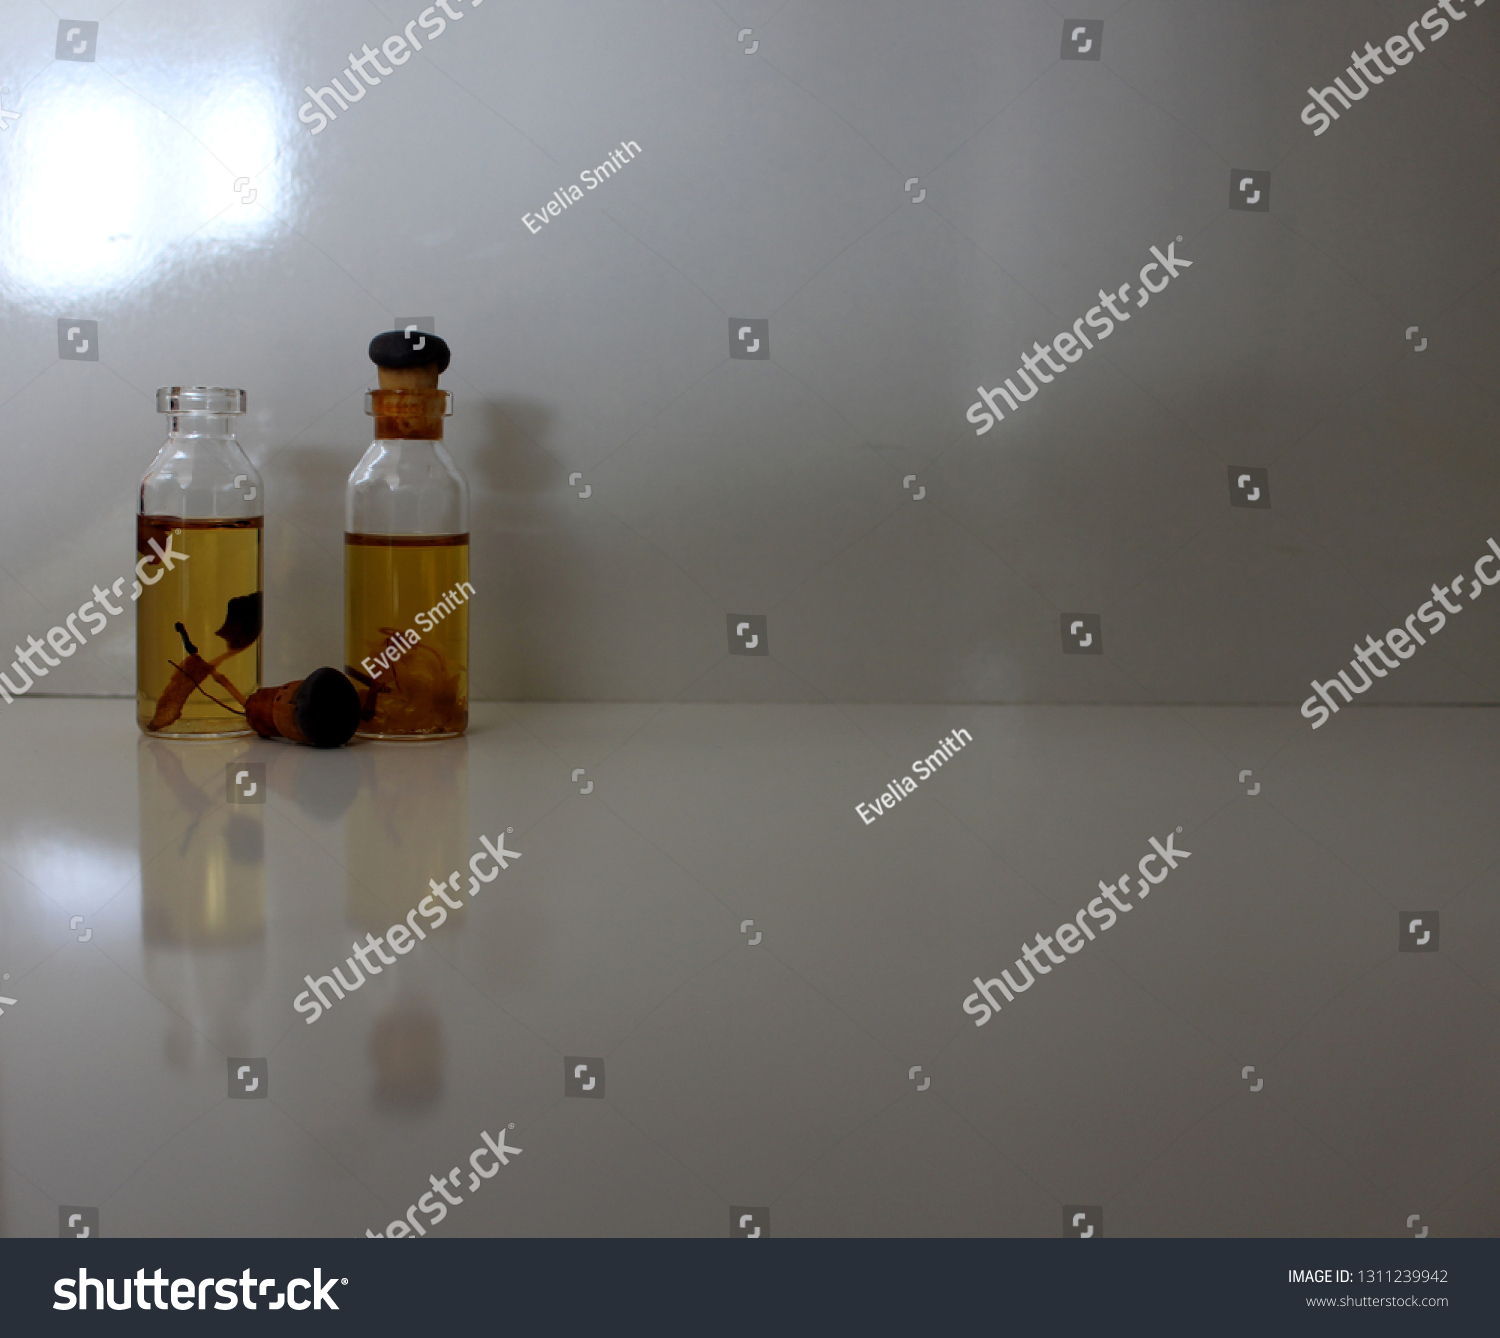 Two bottles of natural perfume, one open, containing plants, on white background #1311239942